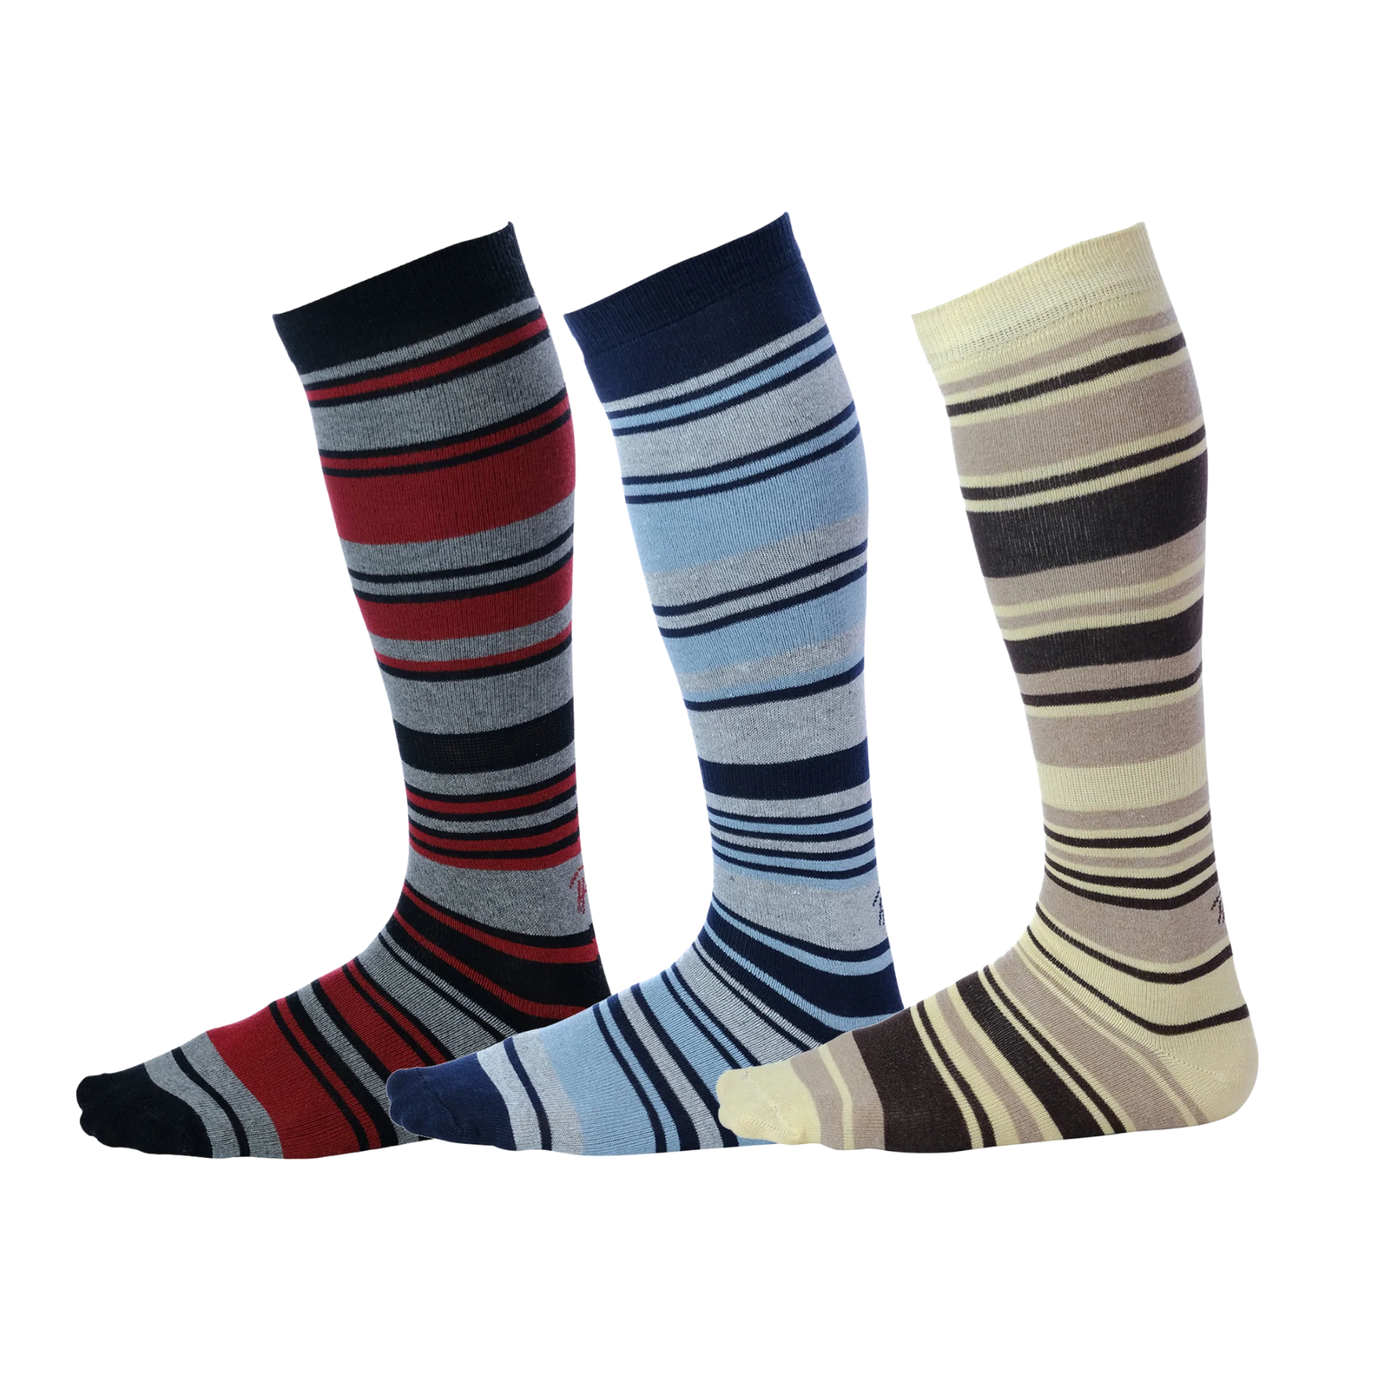 Business As Usual (3 pairs) | Cotton Over the Calf Dress Socks